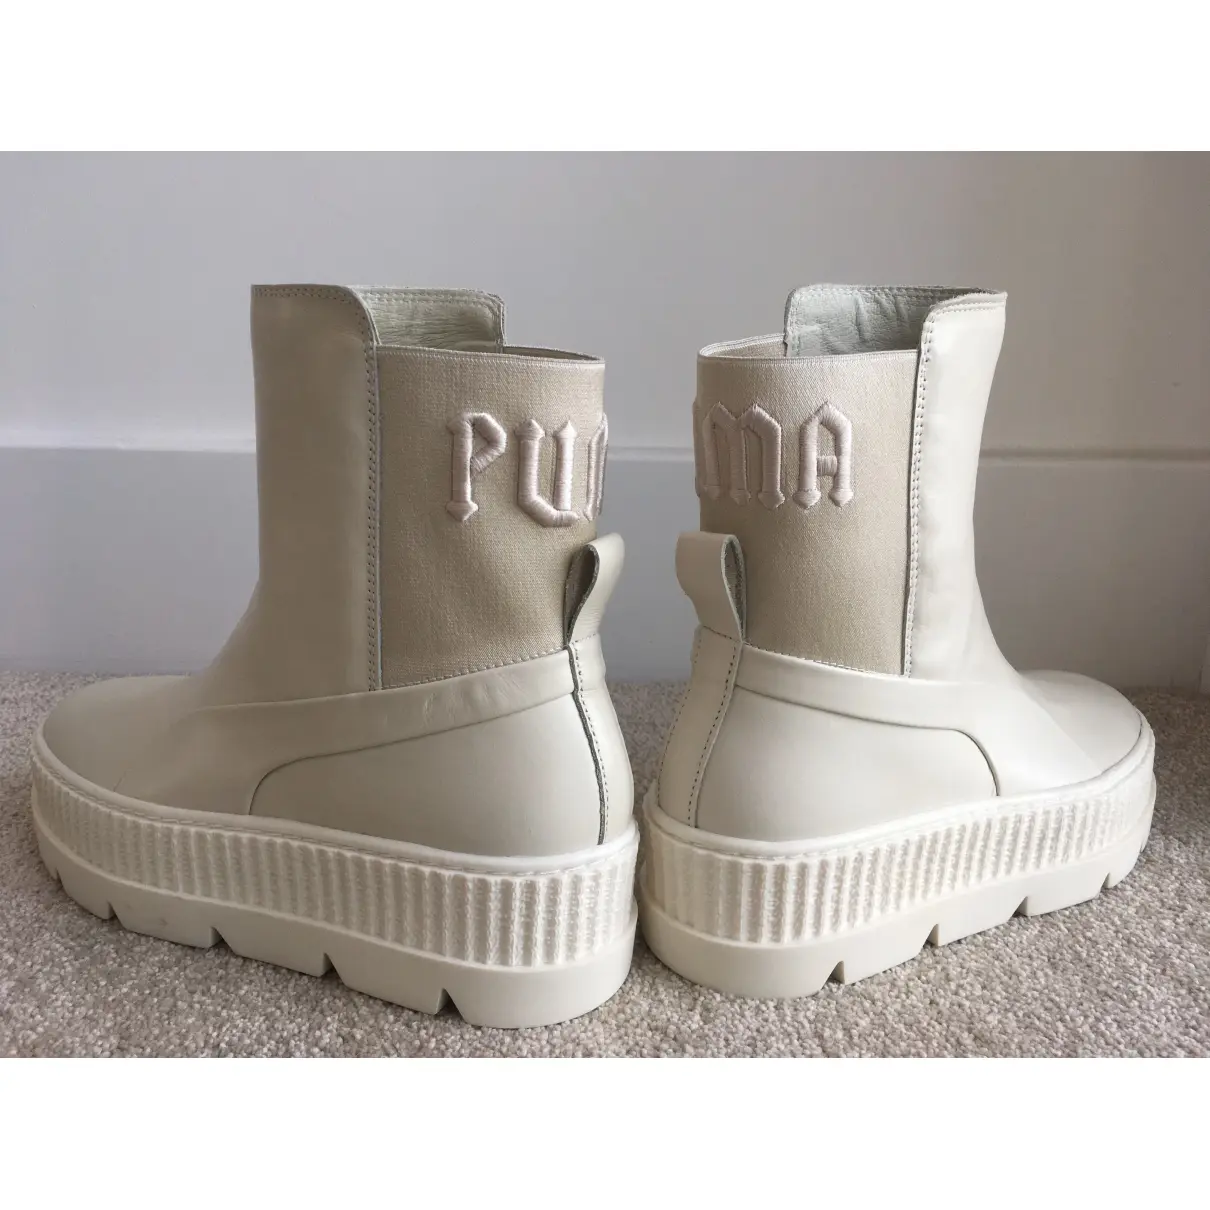 Fenty x Puma Leather ankle boots for sale